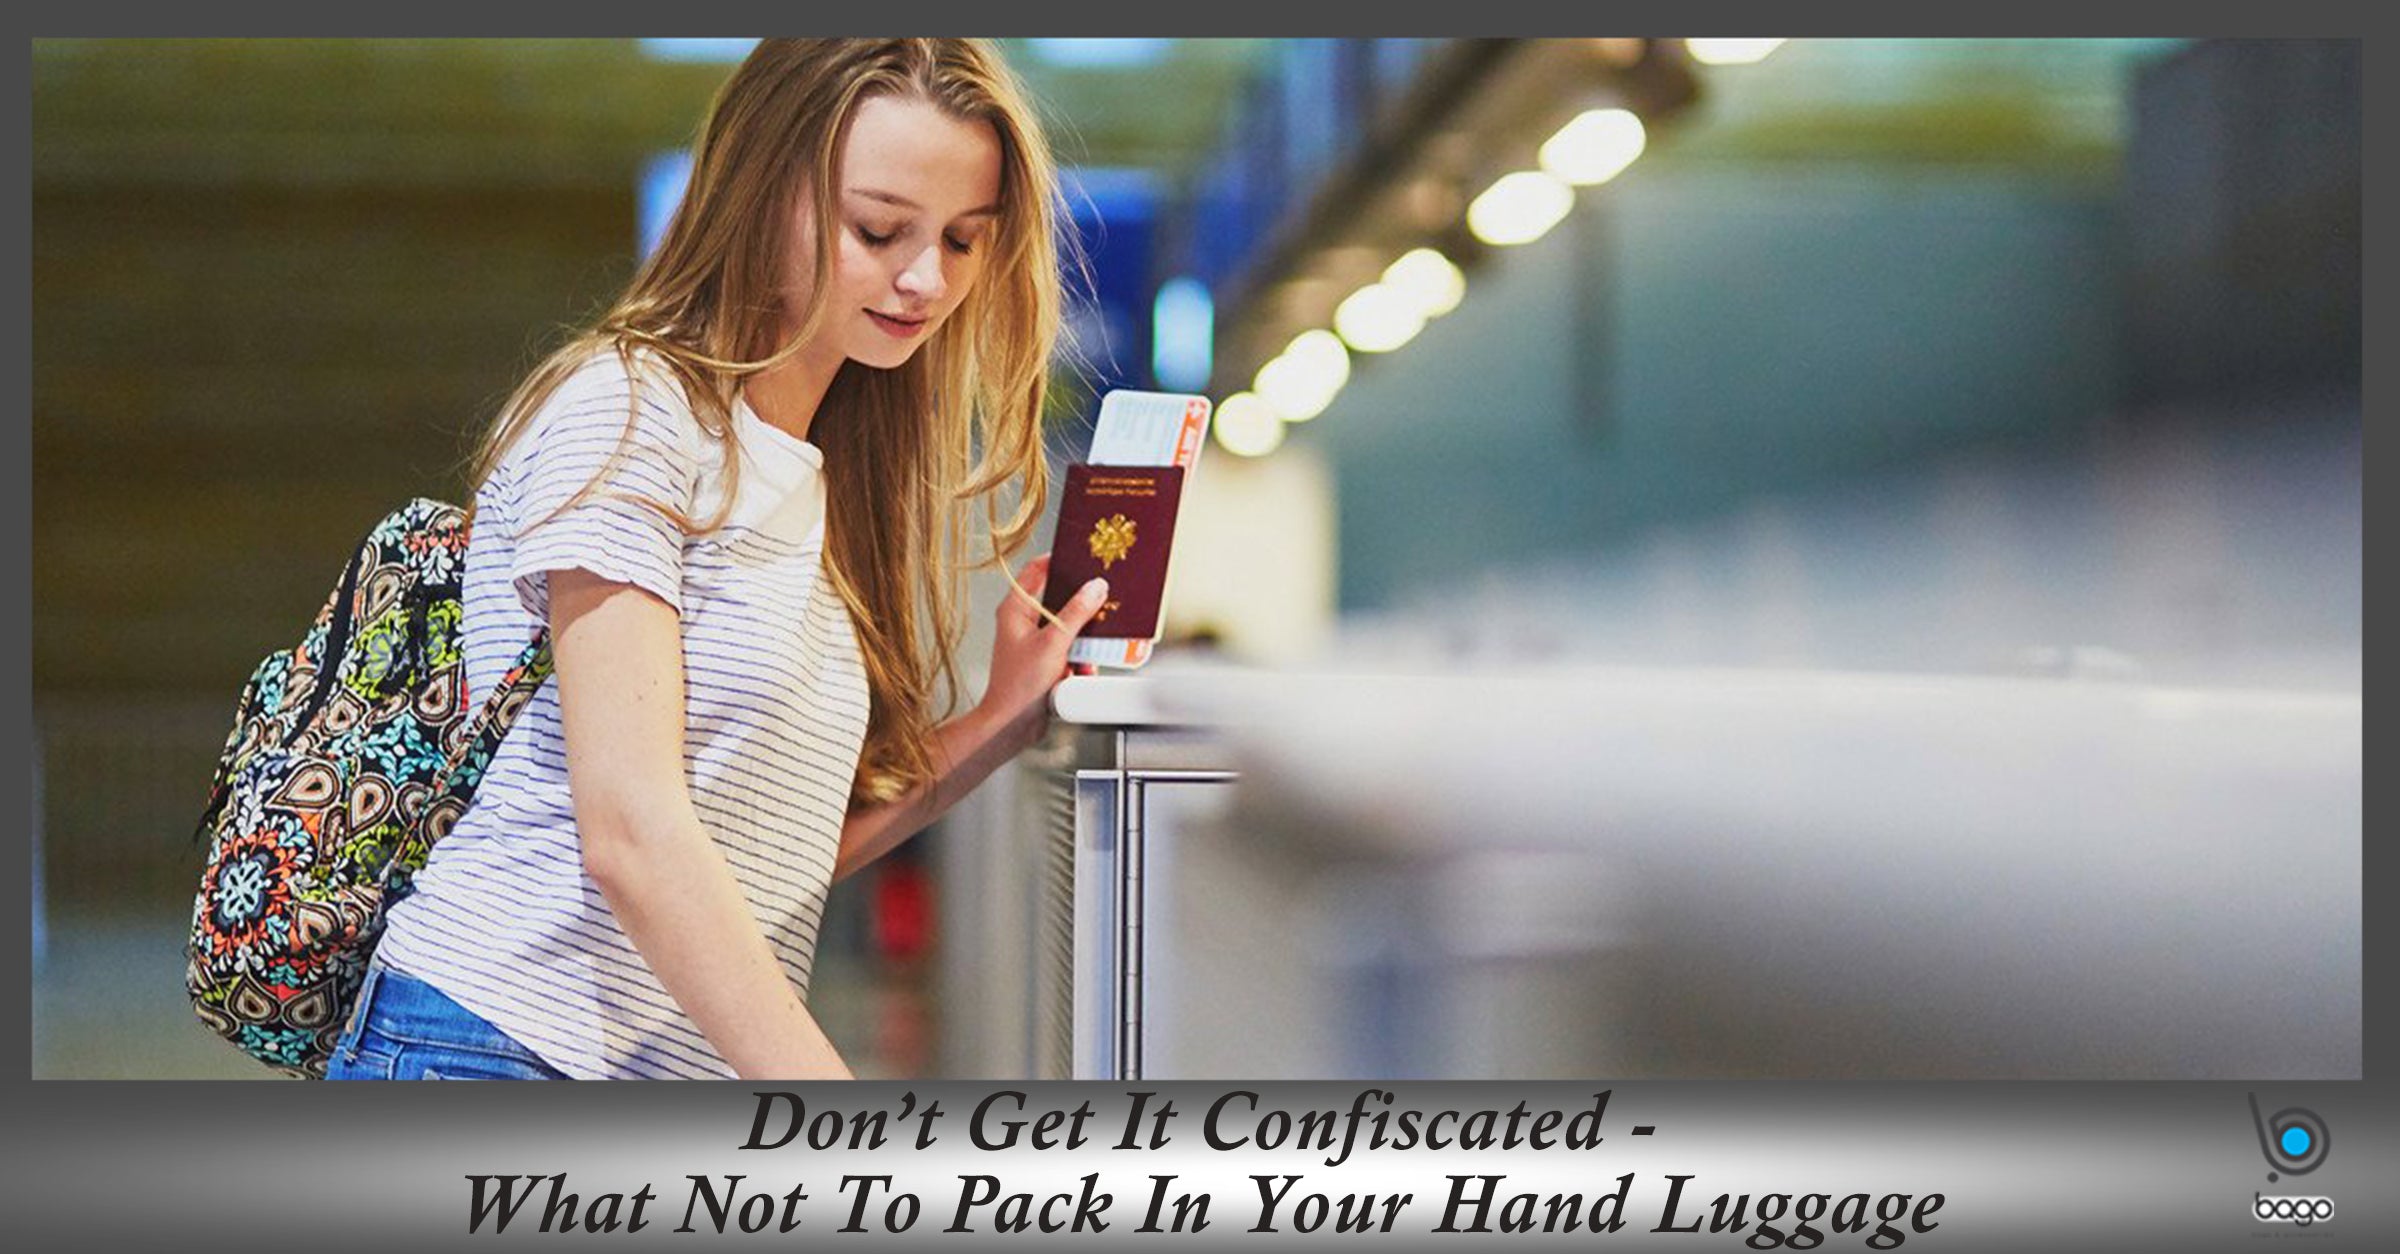 Don’t Get It Confiscated: What Not To Pack In Your Hand Luggage